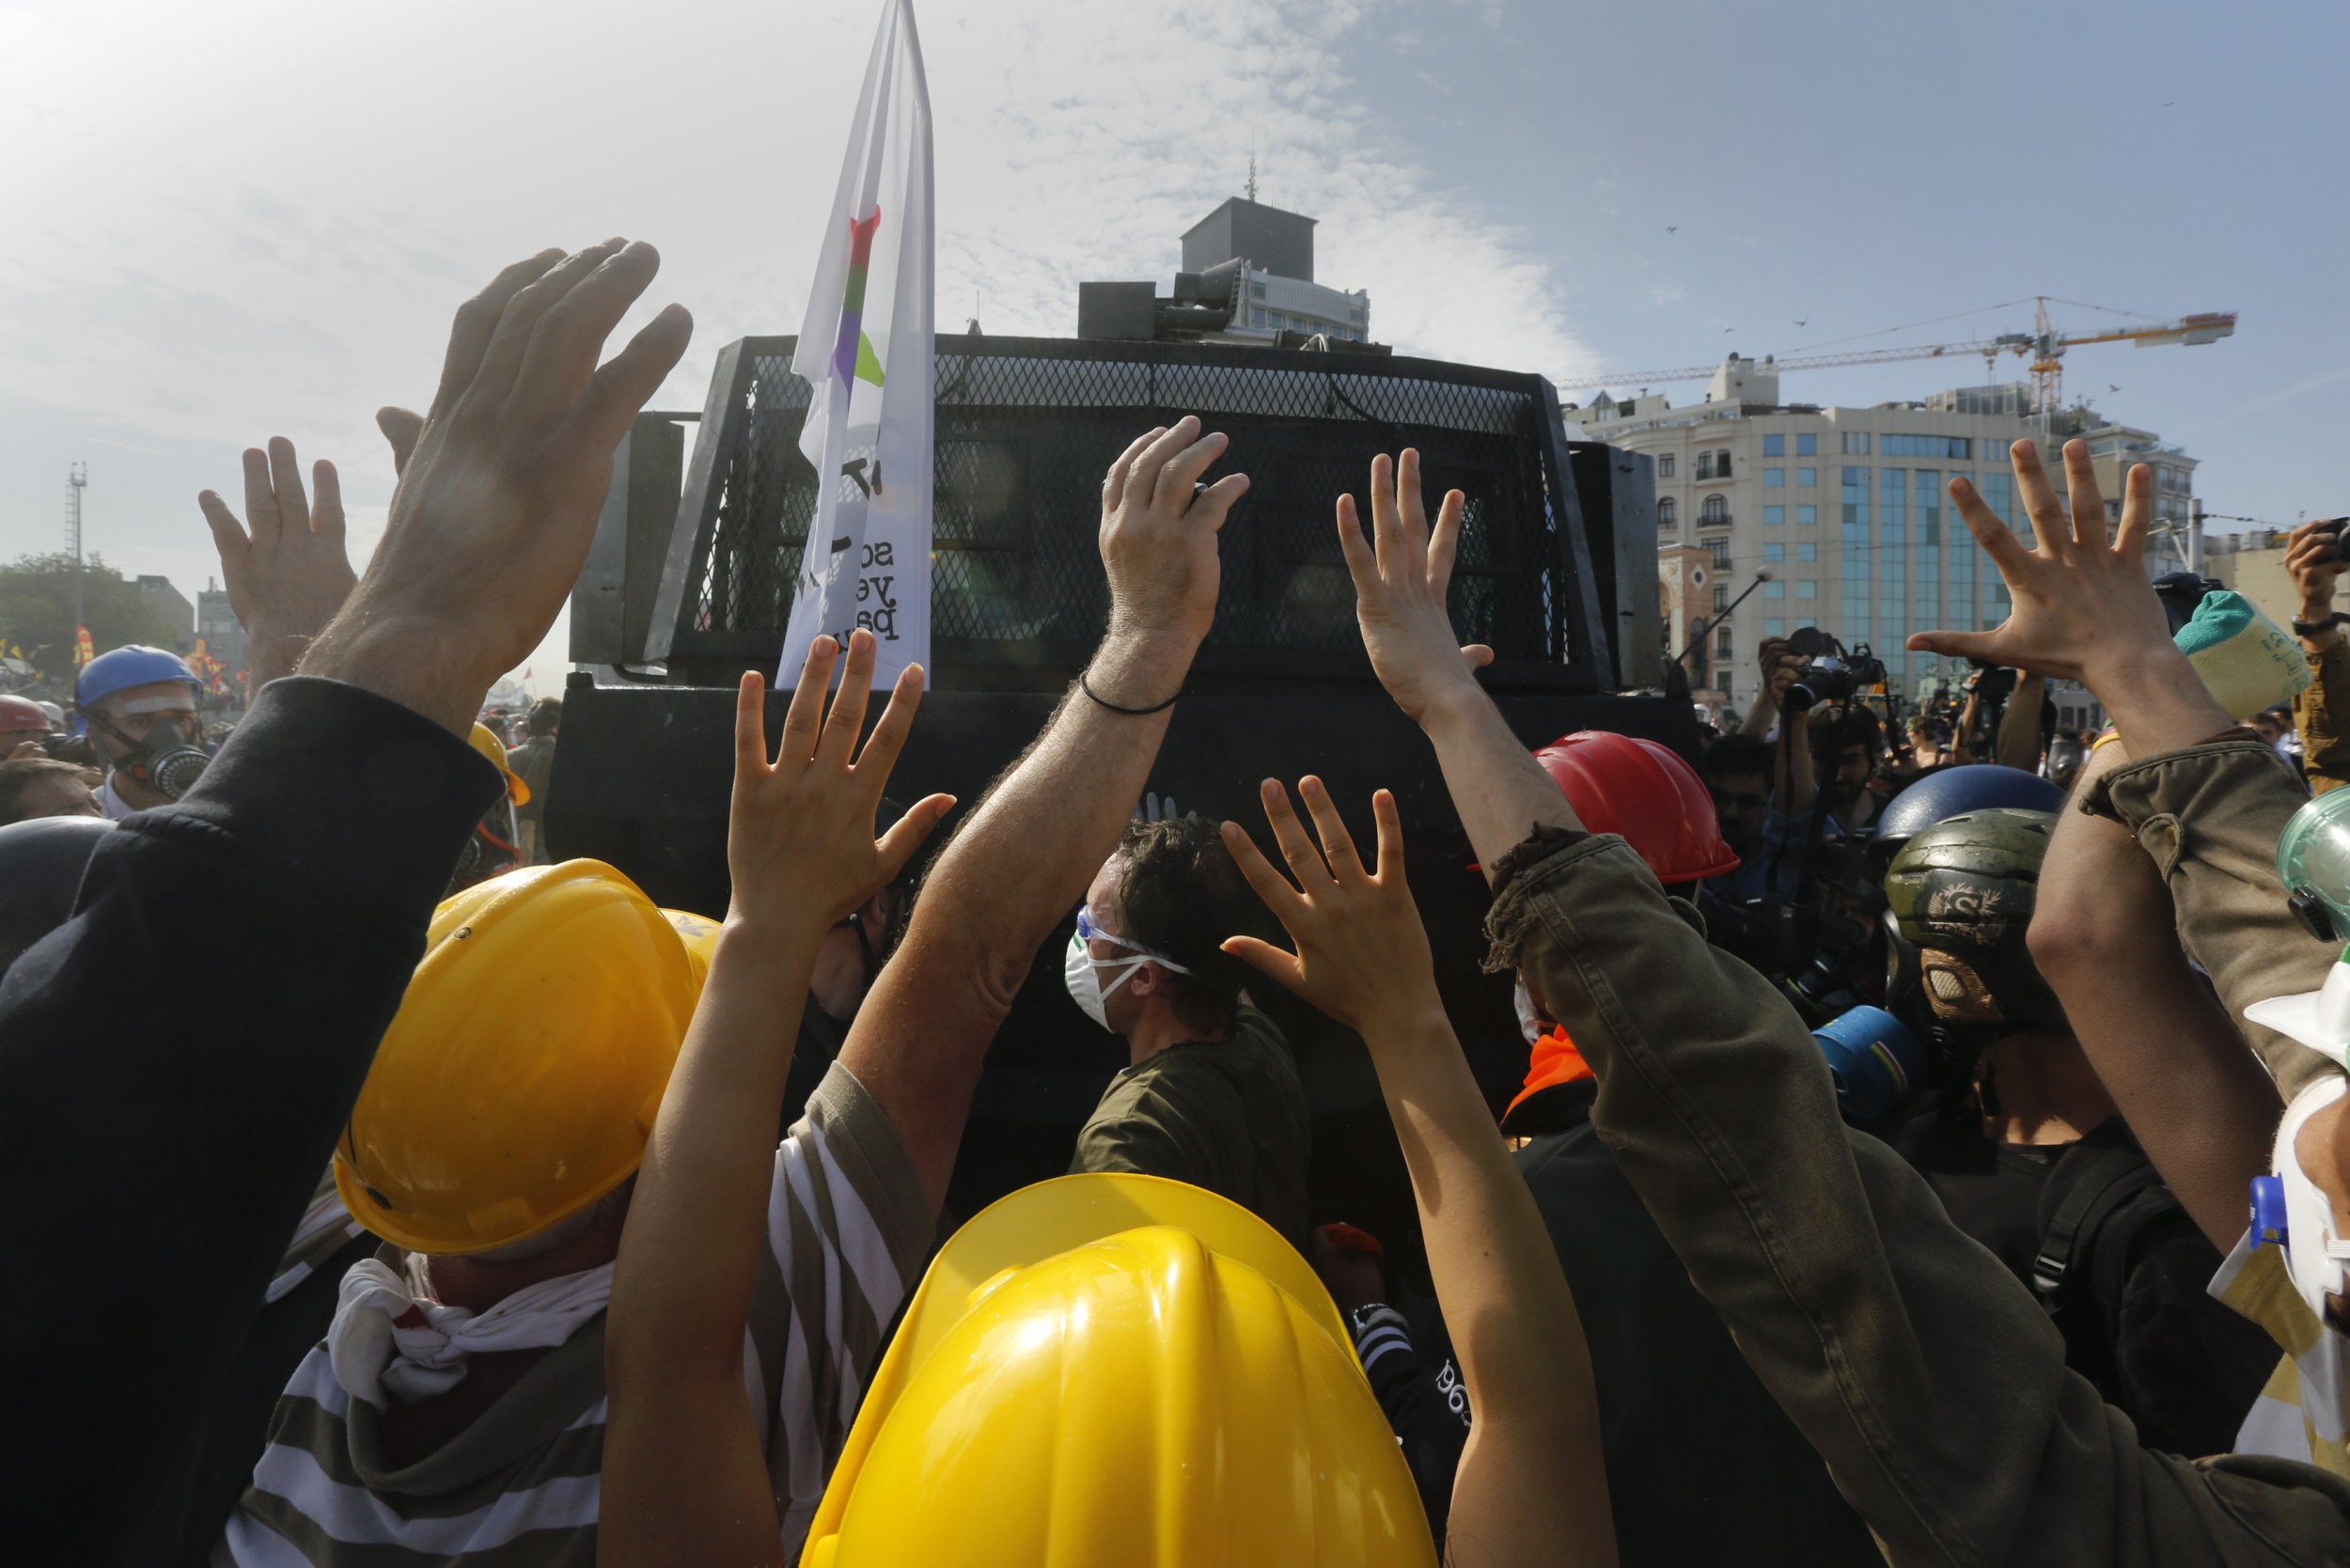 Protesters Stop Water Cannon Vehicle